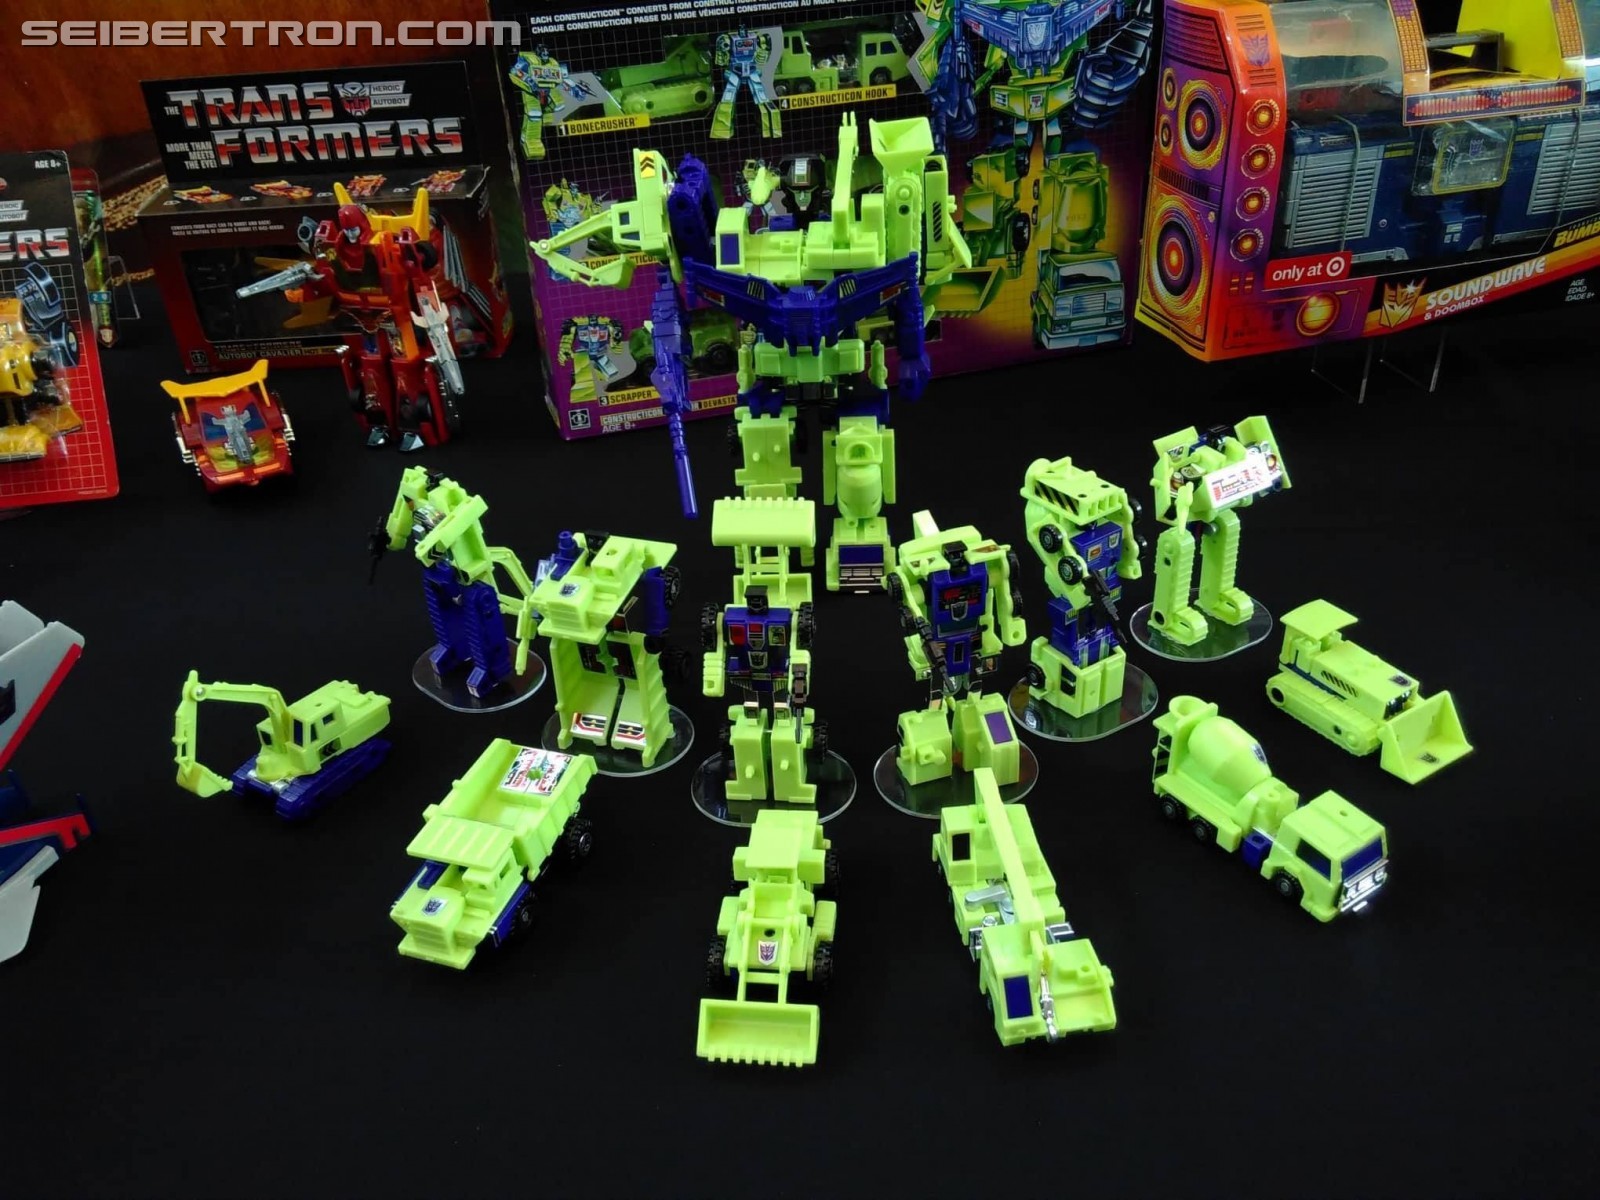 Images of New Generation 1 Reissues at San Diego Comic Con 2018 #HasbroSDCC